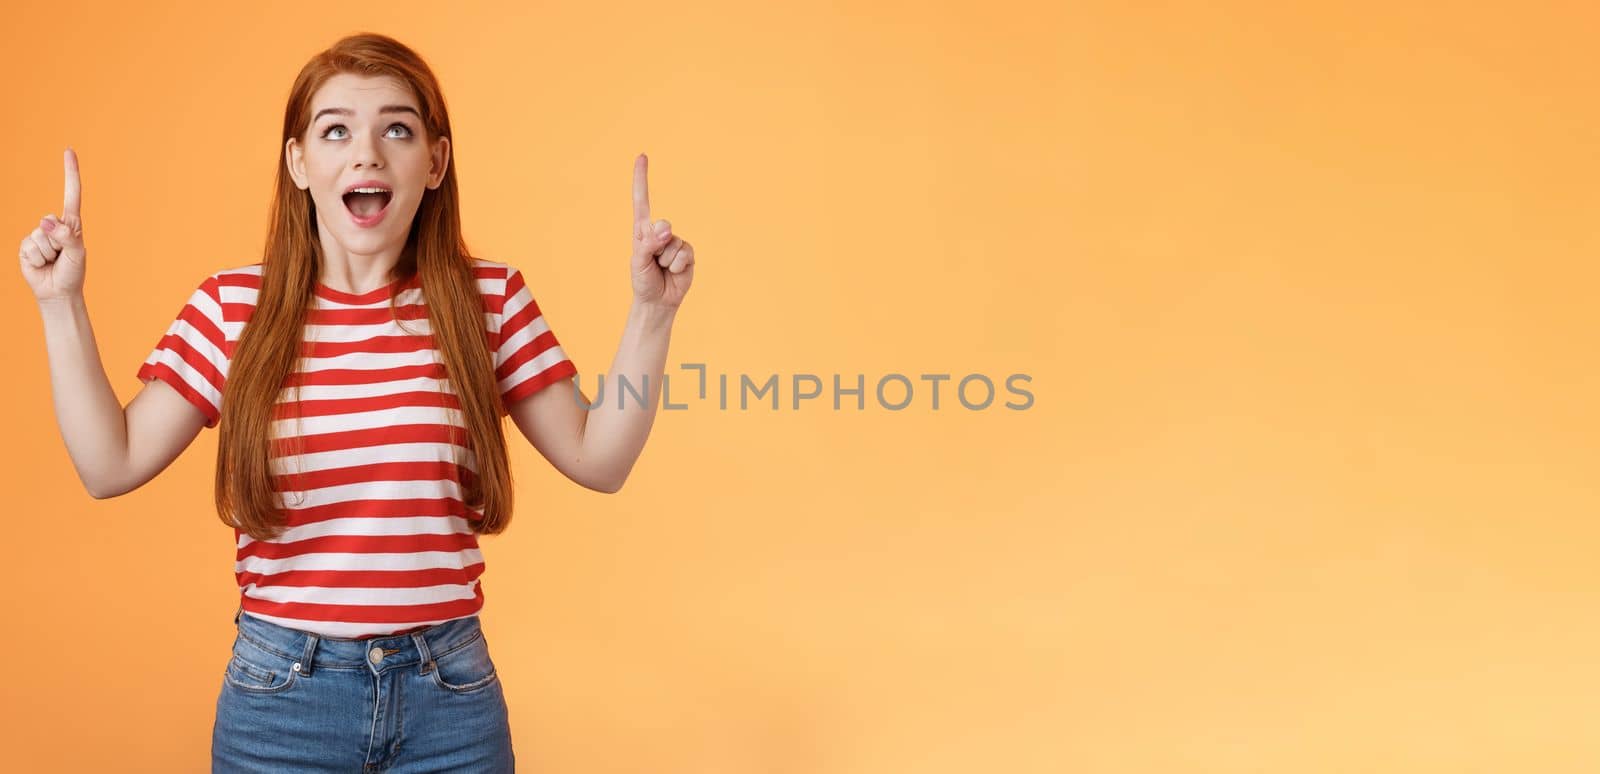 Surprised excited cheerful ginger girl see amazing opportunity, look pointing up amused, drop jaw gasping astonished, pleased awesome cool advertisement, reacting thrilled top copy space.